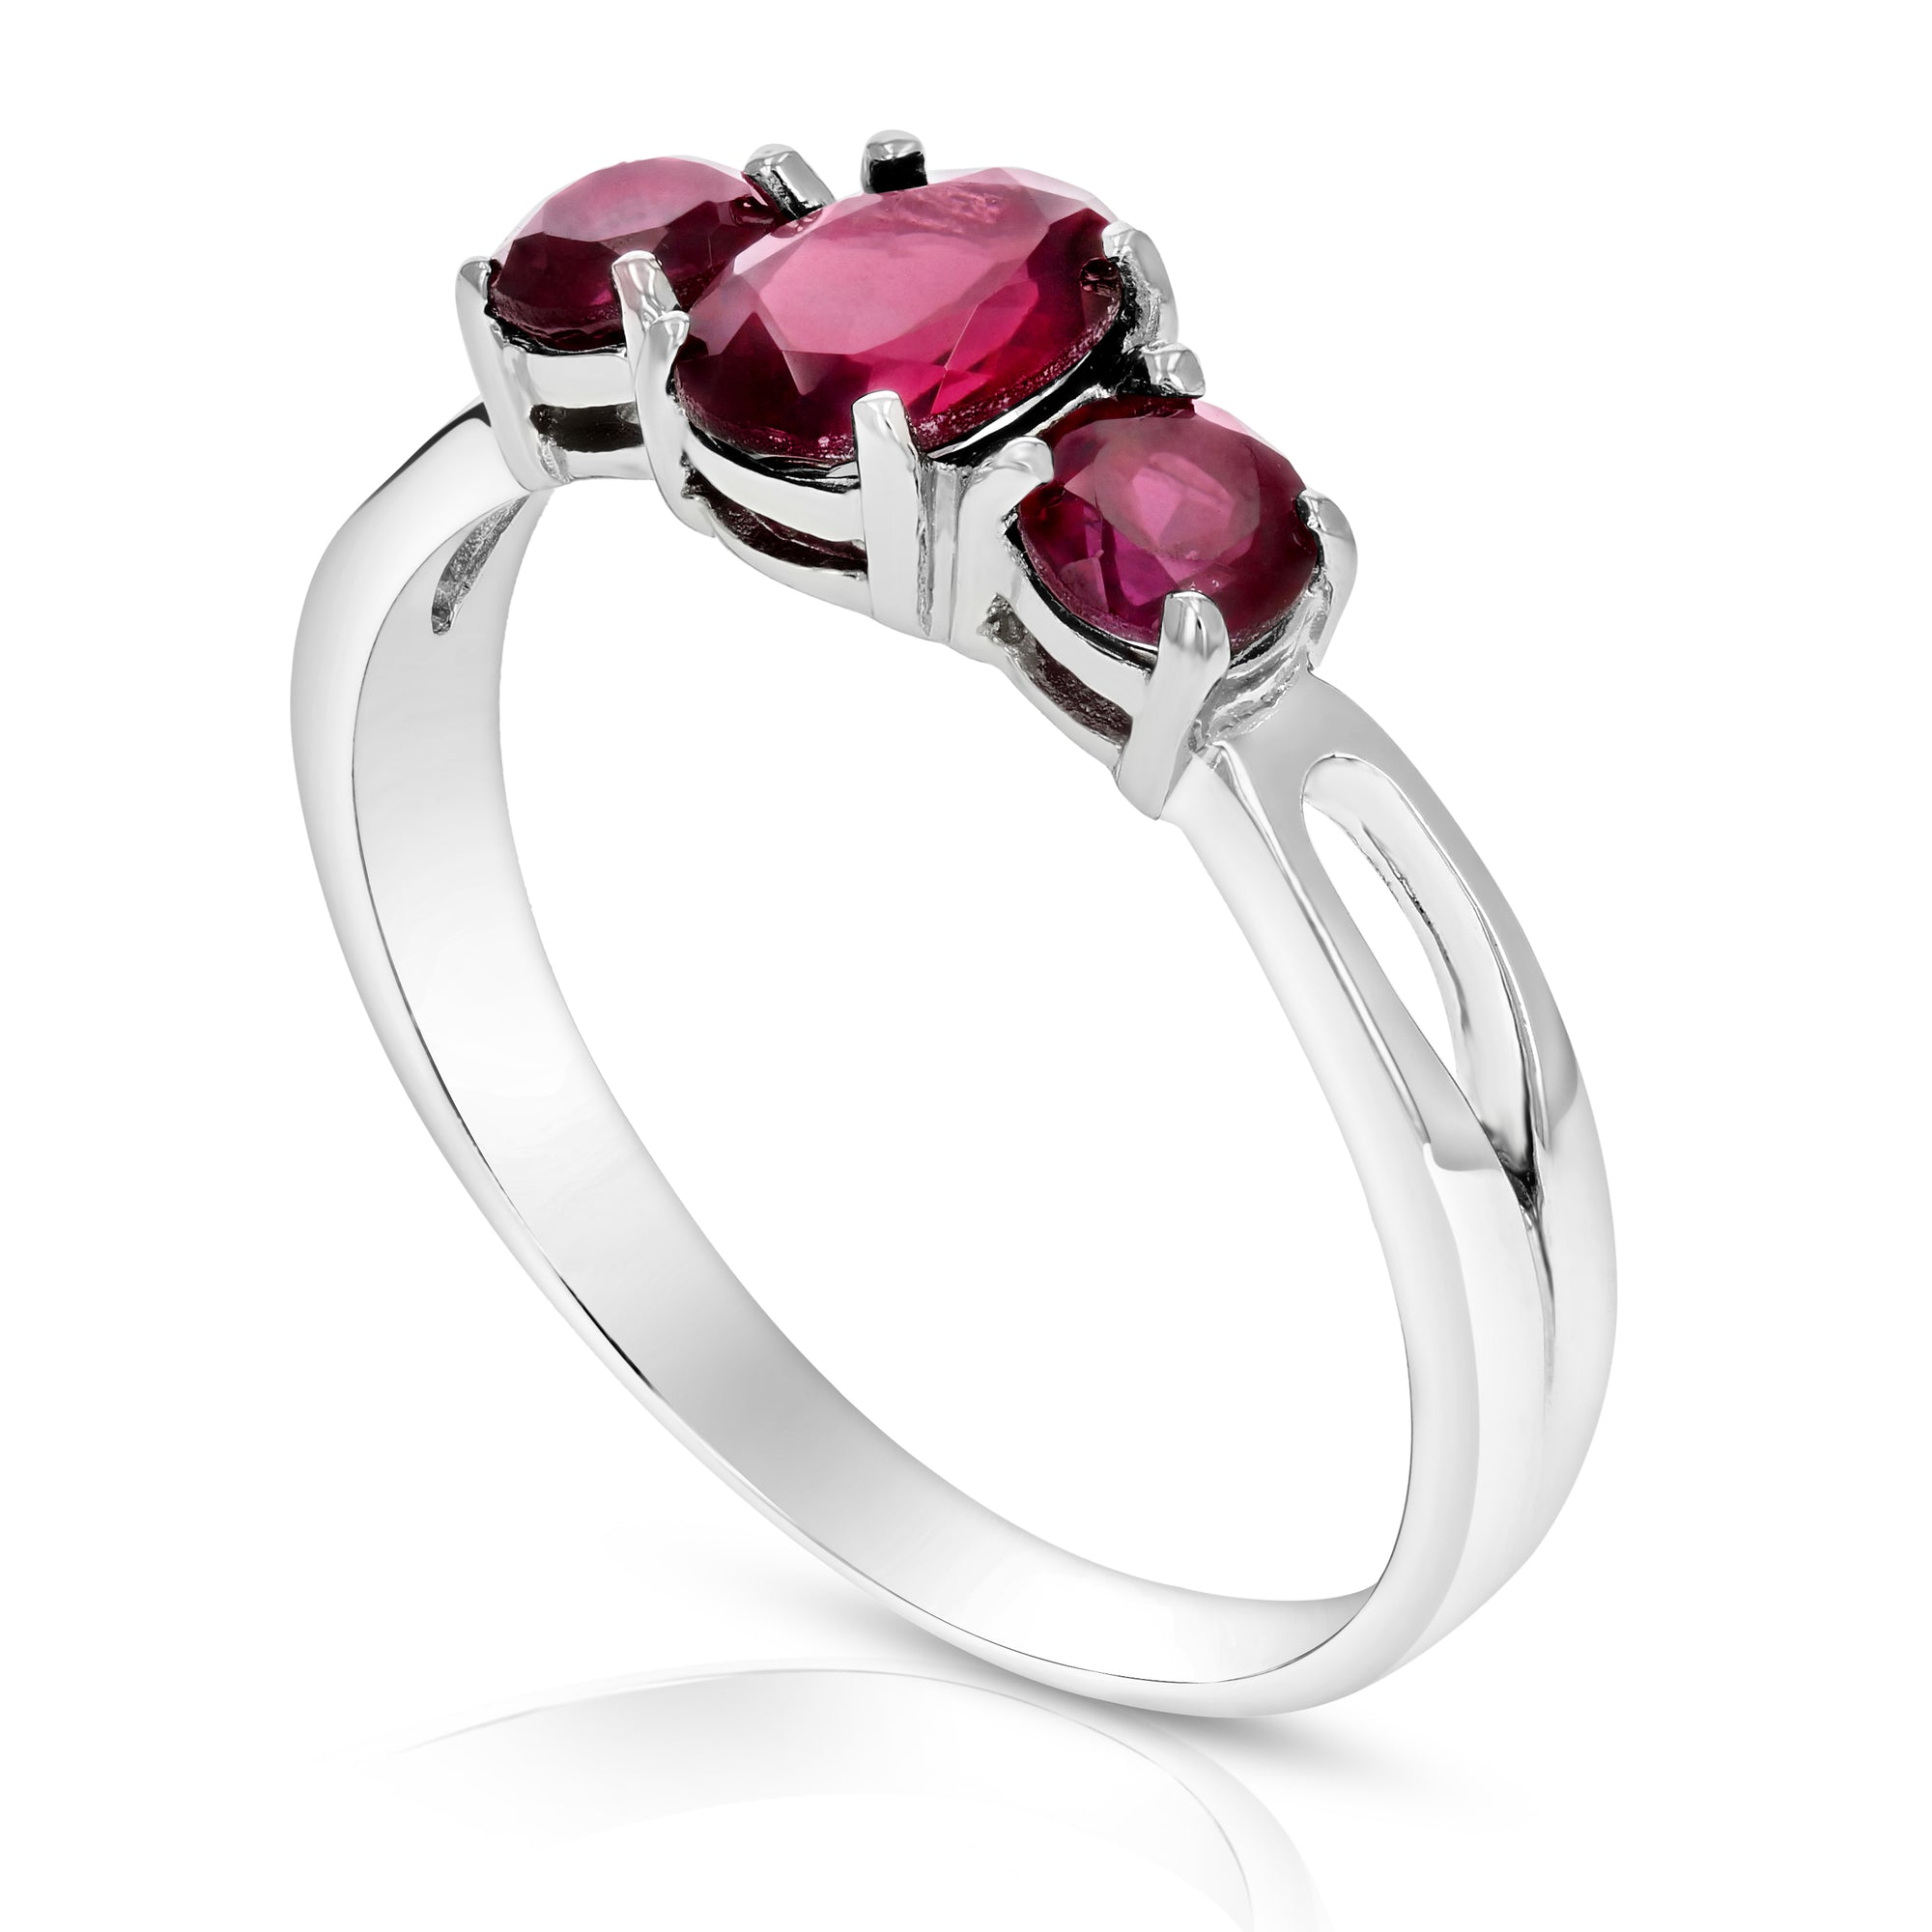 1.20 cttw 3 Stone Garnet Ring in .925 Sterling Silver with Rhodium Plating Oval